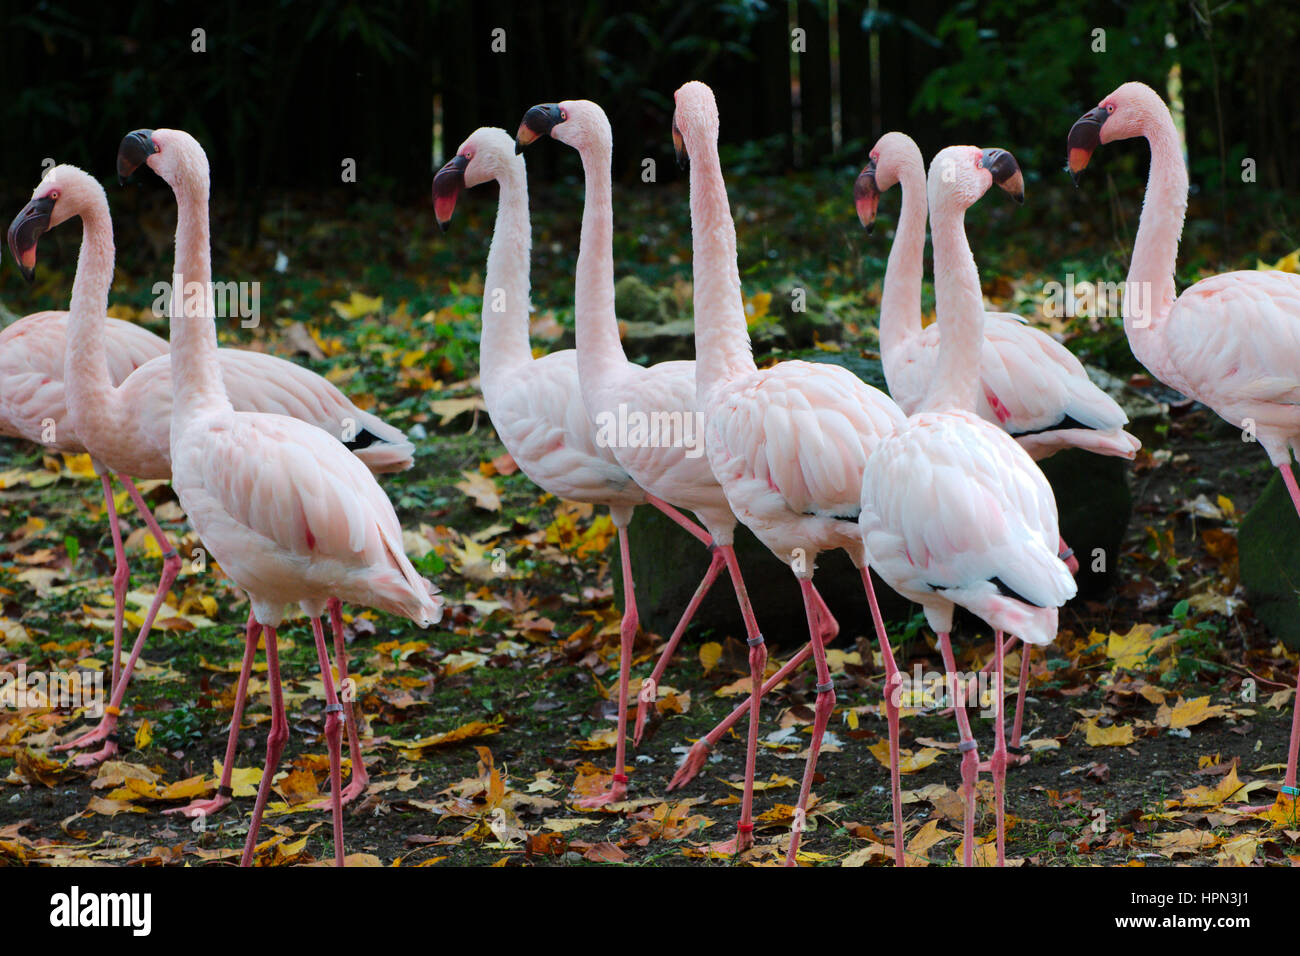 Flock of pink flamingos in a park Stock Photo